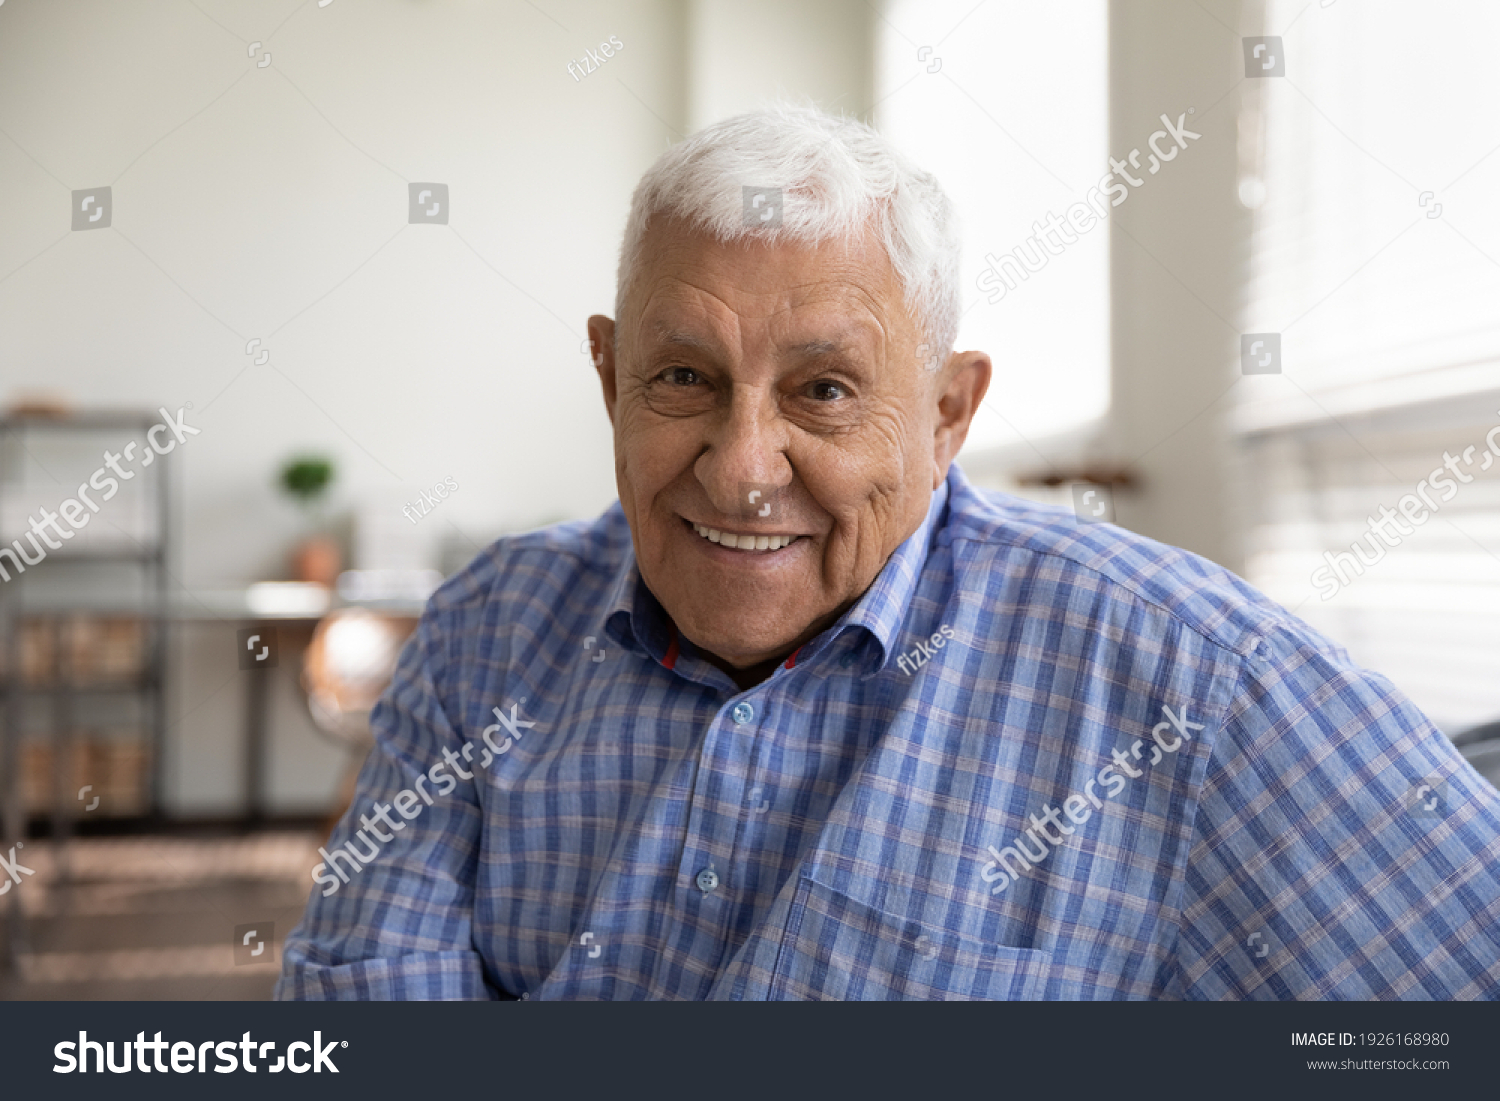 Head shot portrait smiling mature man looking at camera, happy grandfather chatting with relatives online, making video call, senior blogger shooting recording video, elderly teacher working online #1926168980